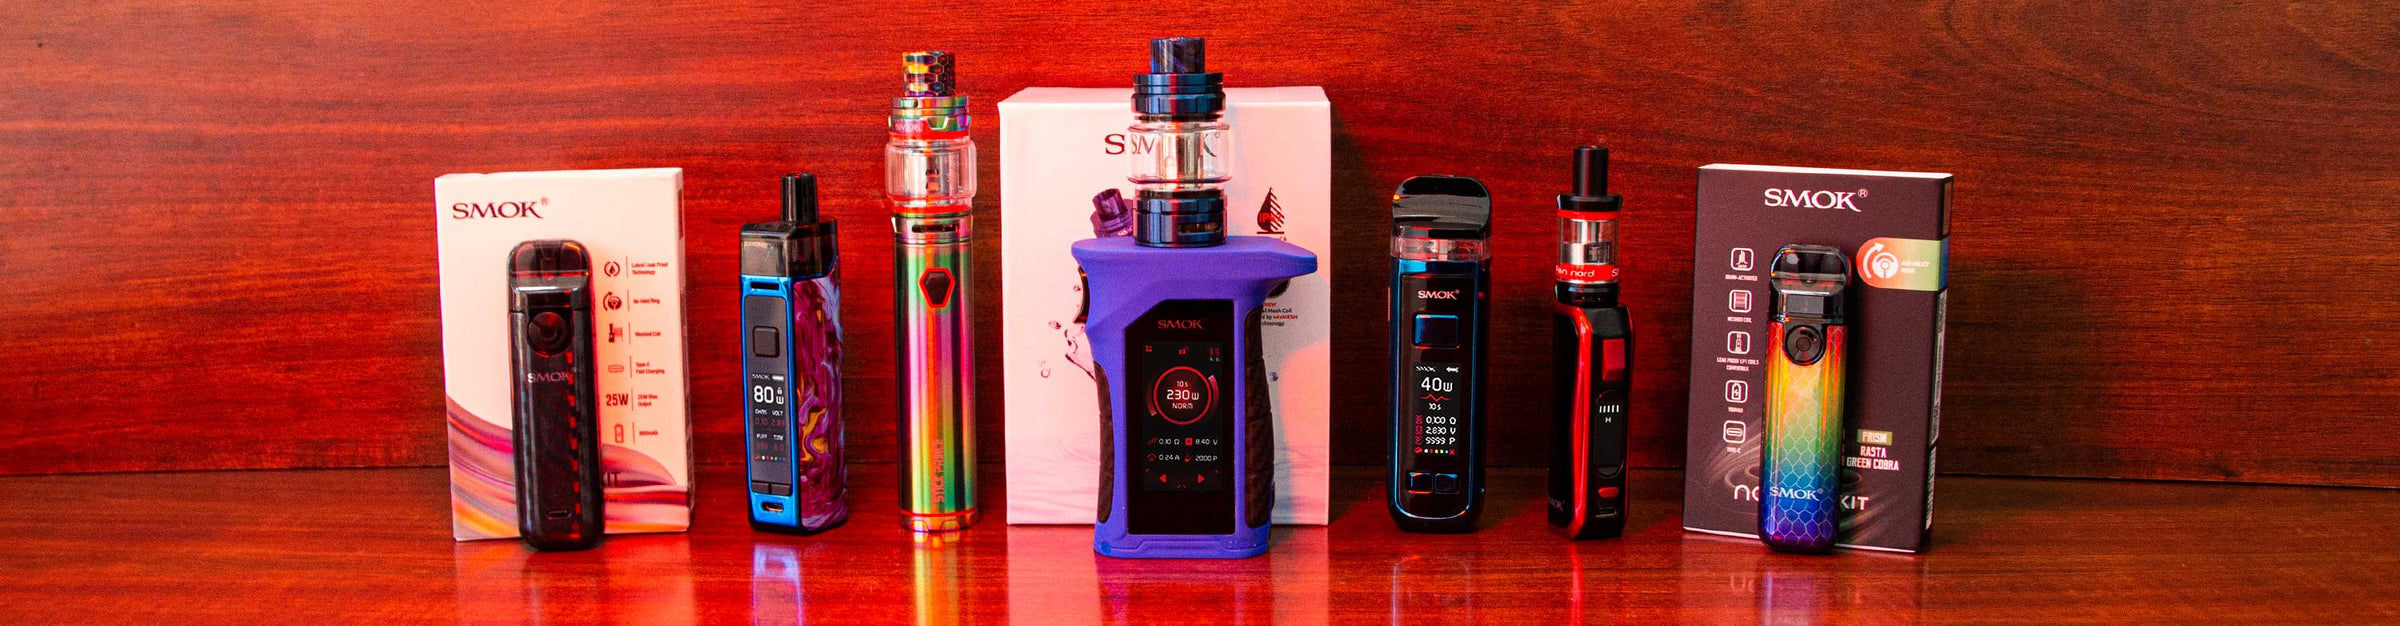 Got Vape Retail SMOK products lined up standing on wooden table with wood background under red lighting